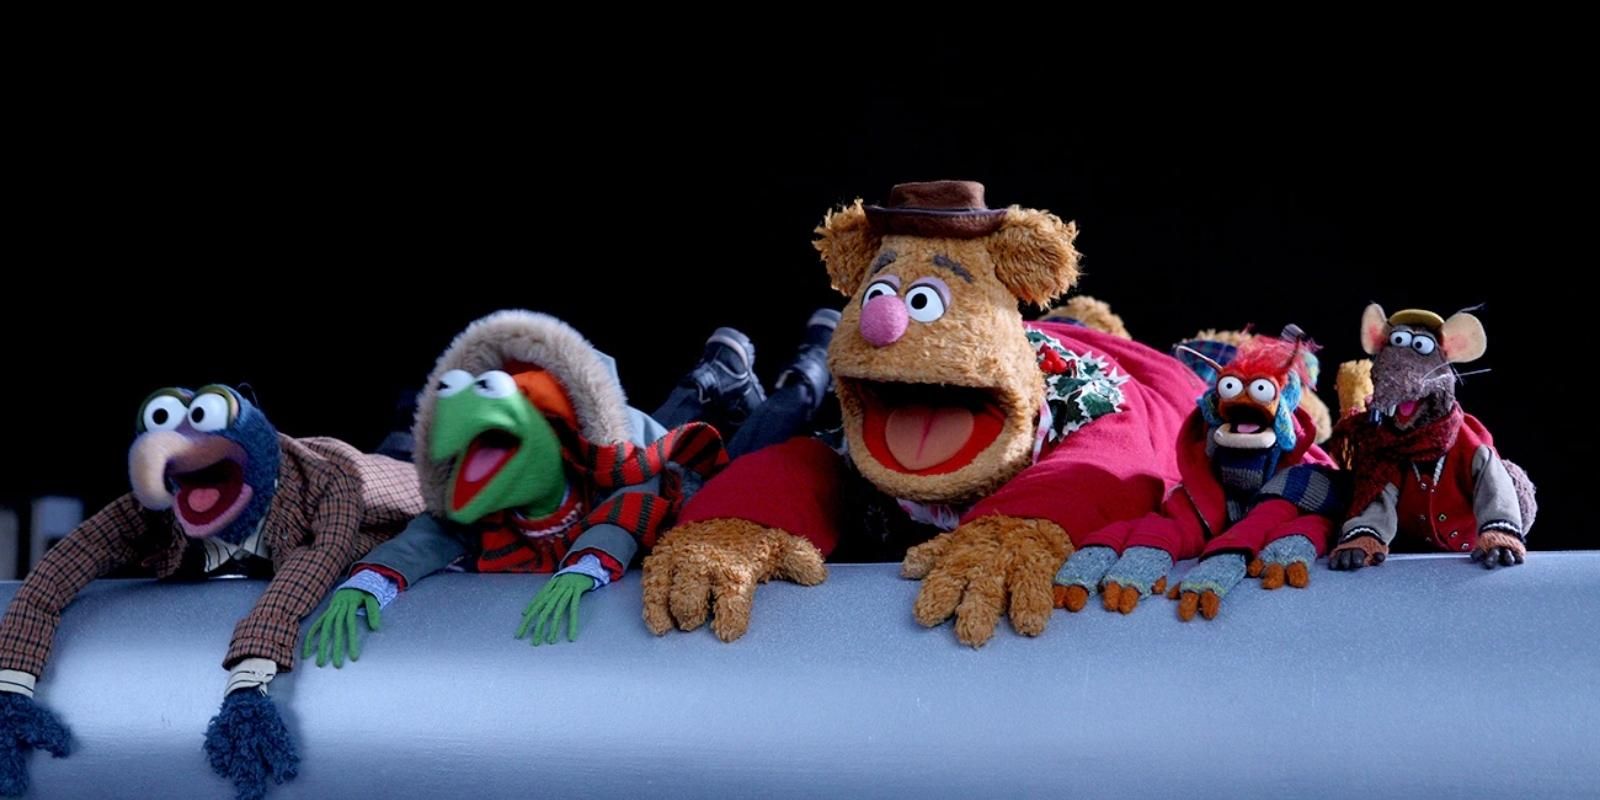 Gonzo the Great, Kermit the Frog, Fozzie Bear, Pepe the King Prawn, and Rizzo the Rat scream outside at night in A Muppet Christmas Letters to Santa